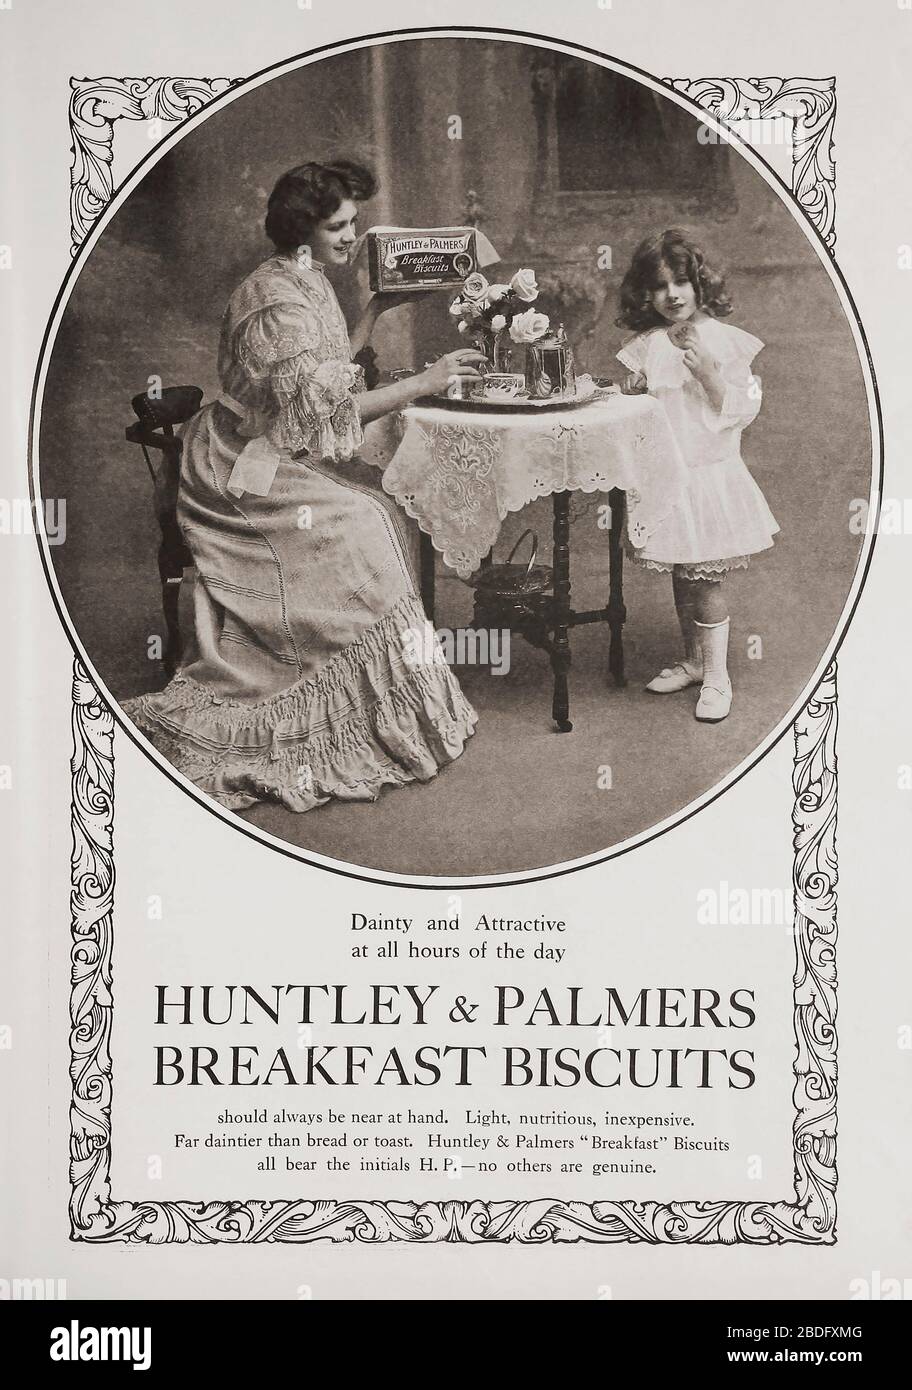 EDITORIAL  Advertisment for Huntley & Palmers Breakfast Biscuits in the June 1907 edition of The Graphic, a weekly illustrated newspaper, published in London from 1869 to 1932. Stock Photo